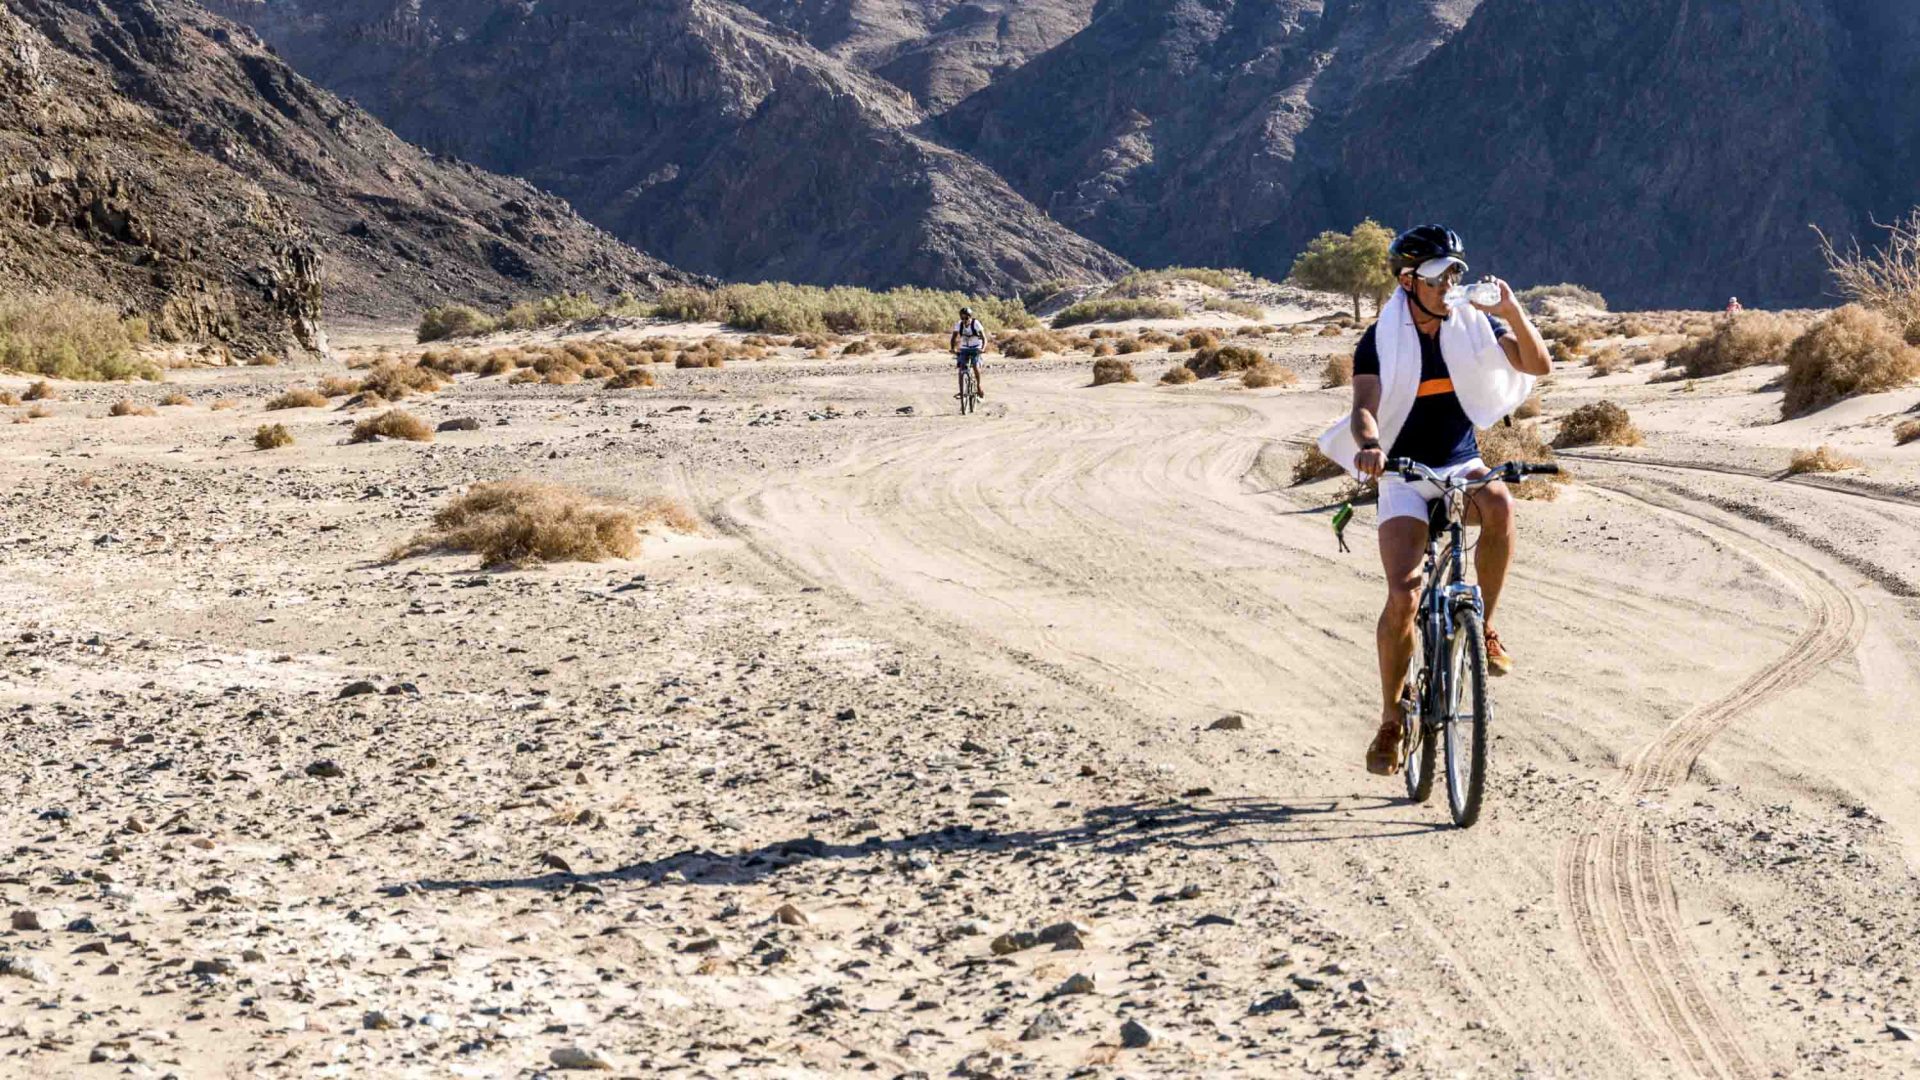 Difficult, dry, and spectacularly different: This is Egypt by bike